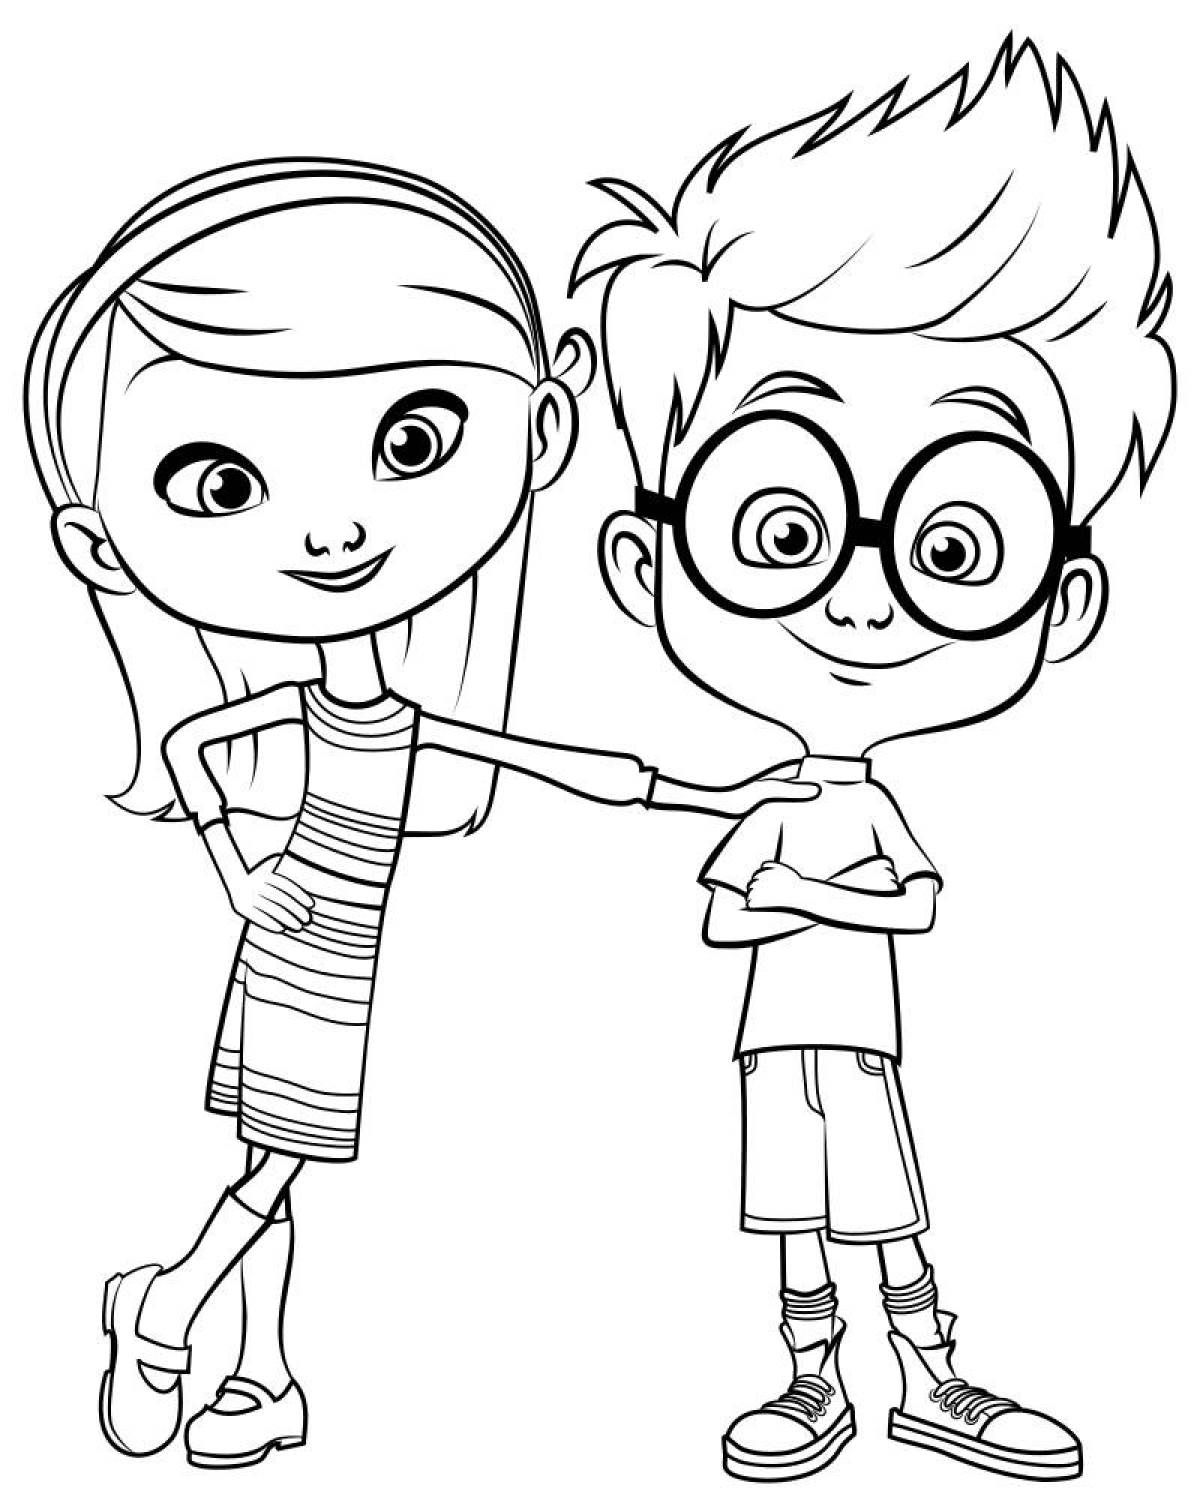 Girl and boy with glasses